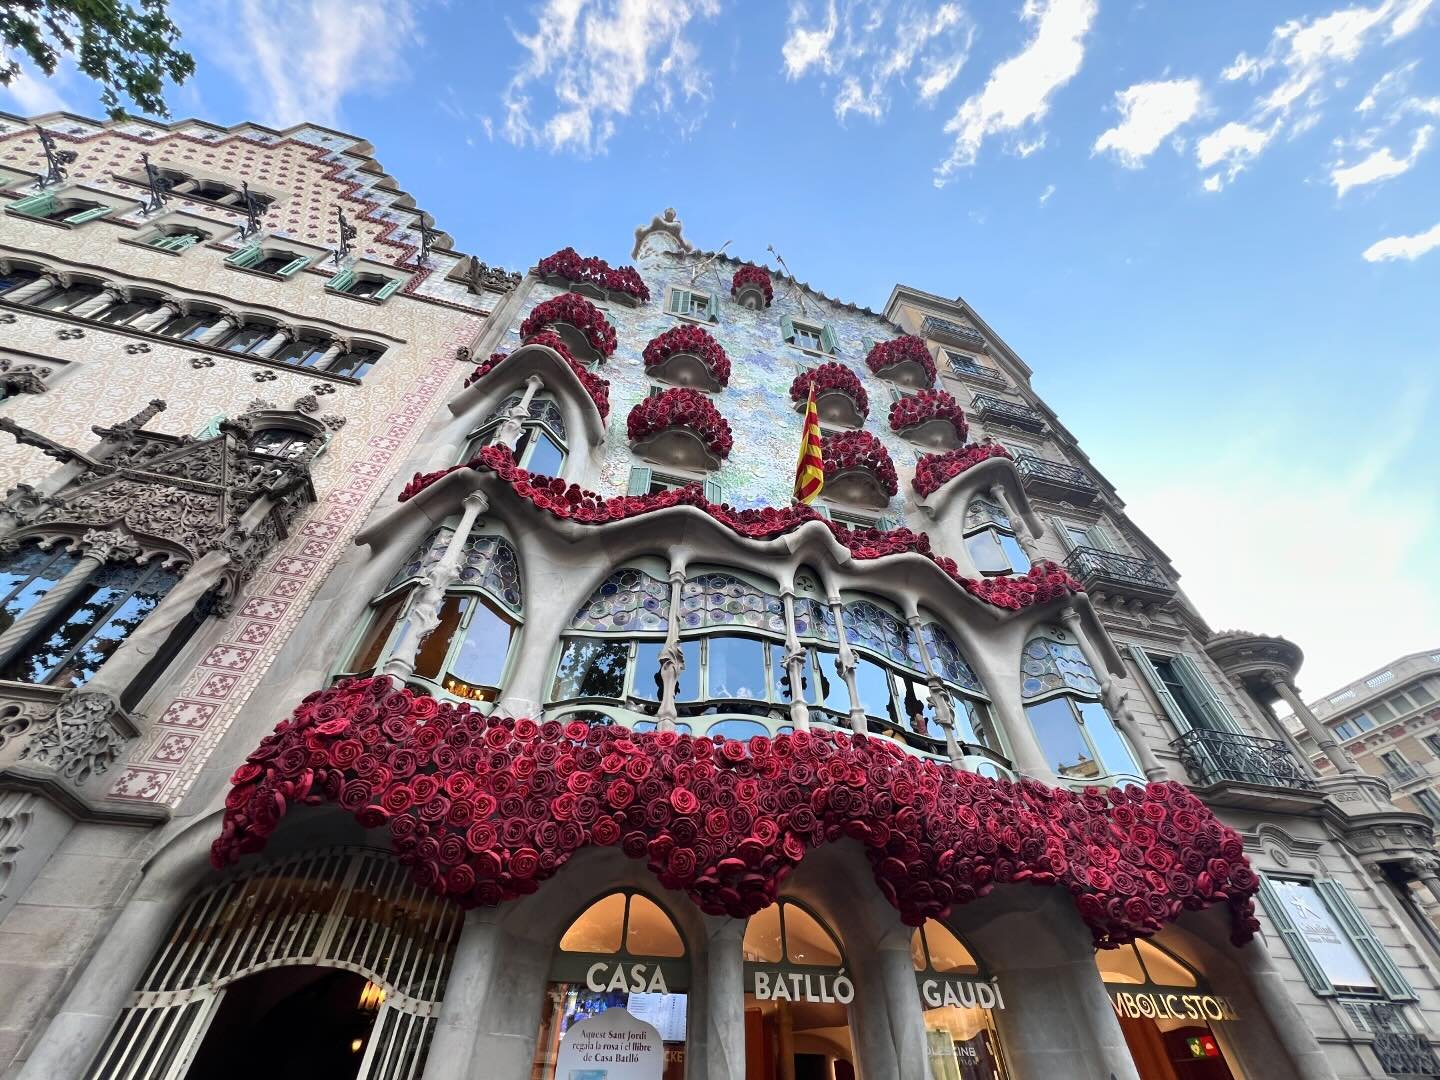 Casa Batllo decked out for Sant Jordi Day. It&rsquo;s like Valentines Day, except men gift women roses and women gift men books. @slippy and I made the required exchange. 🌹📙🐉&hearts;️